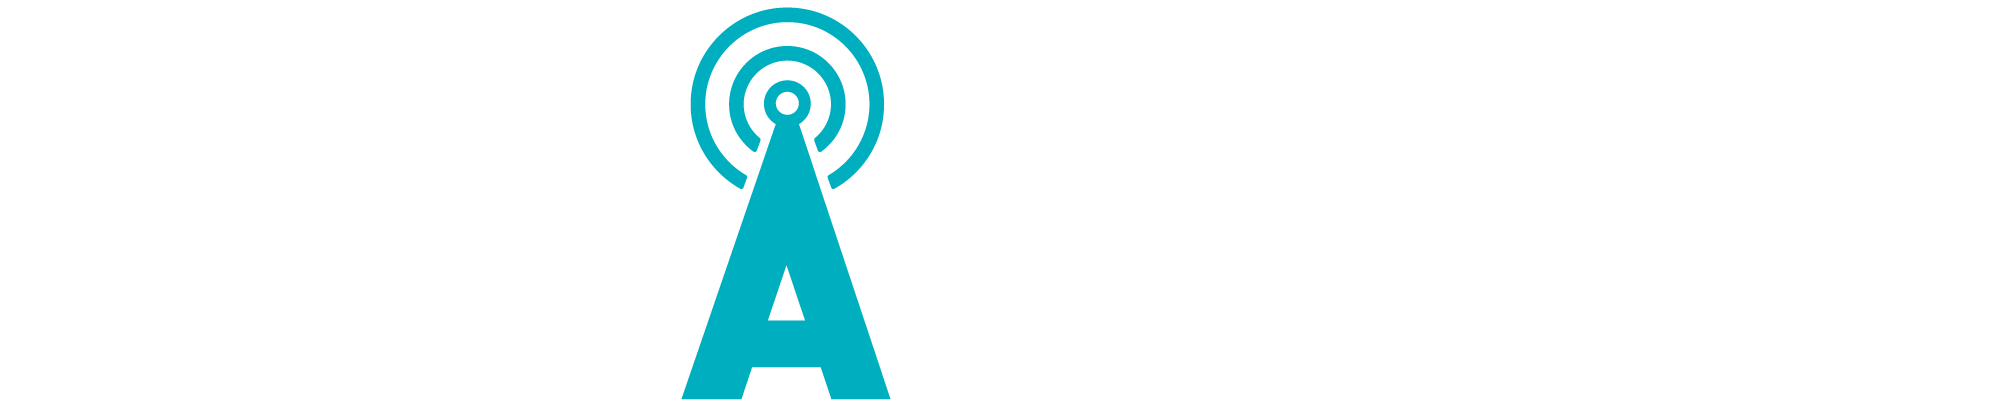 Frequency Radio Online